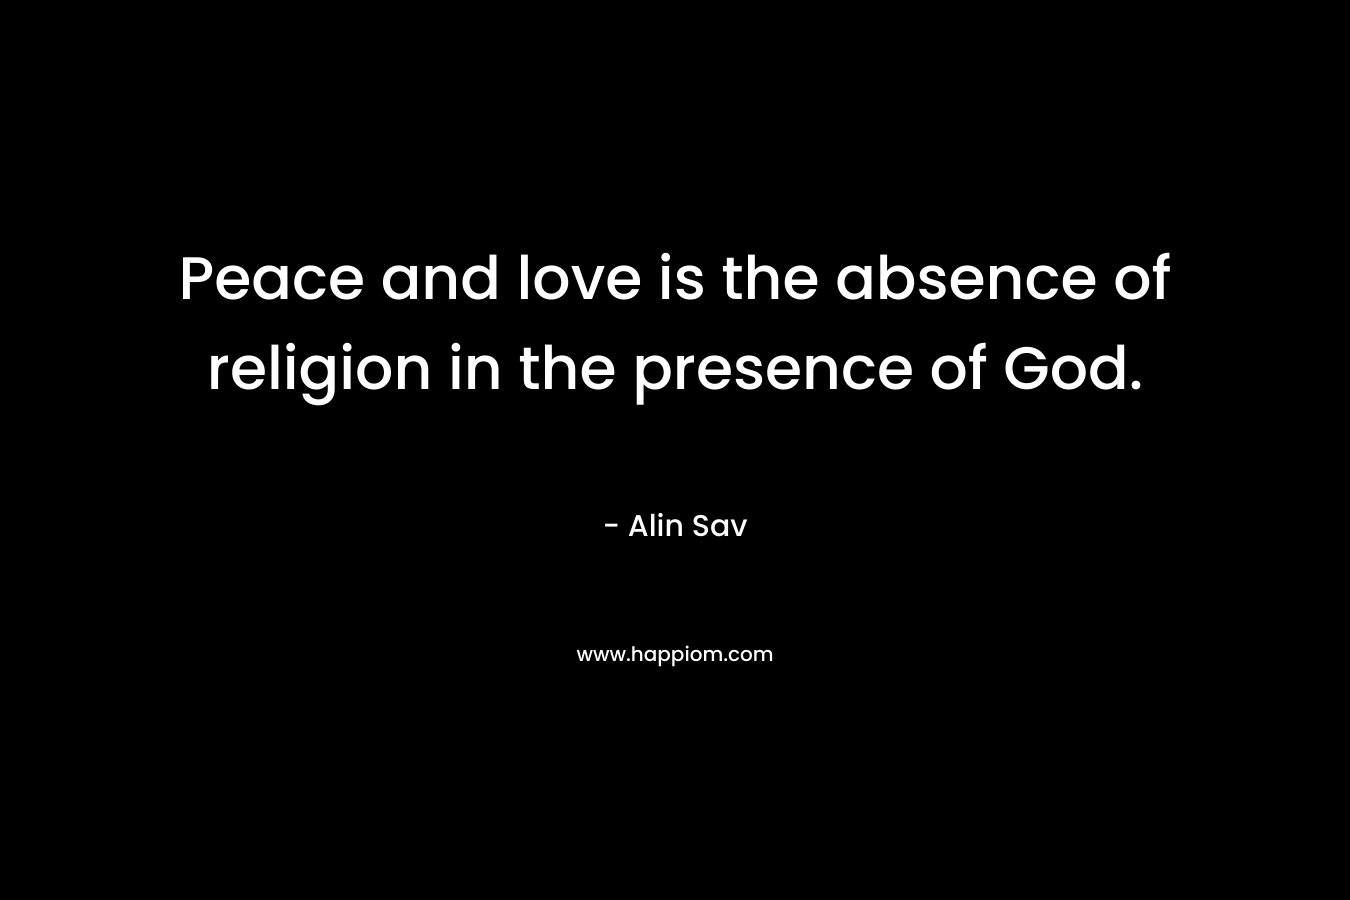 Peace and love is the absence of religion in the presence of God.